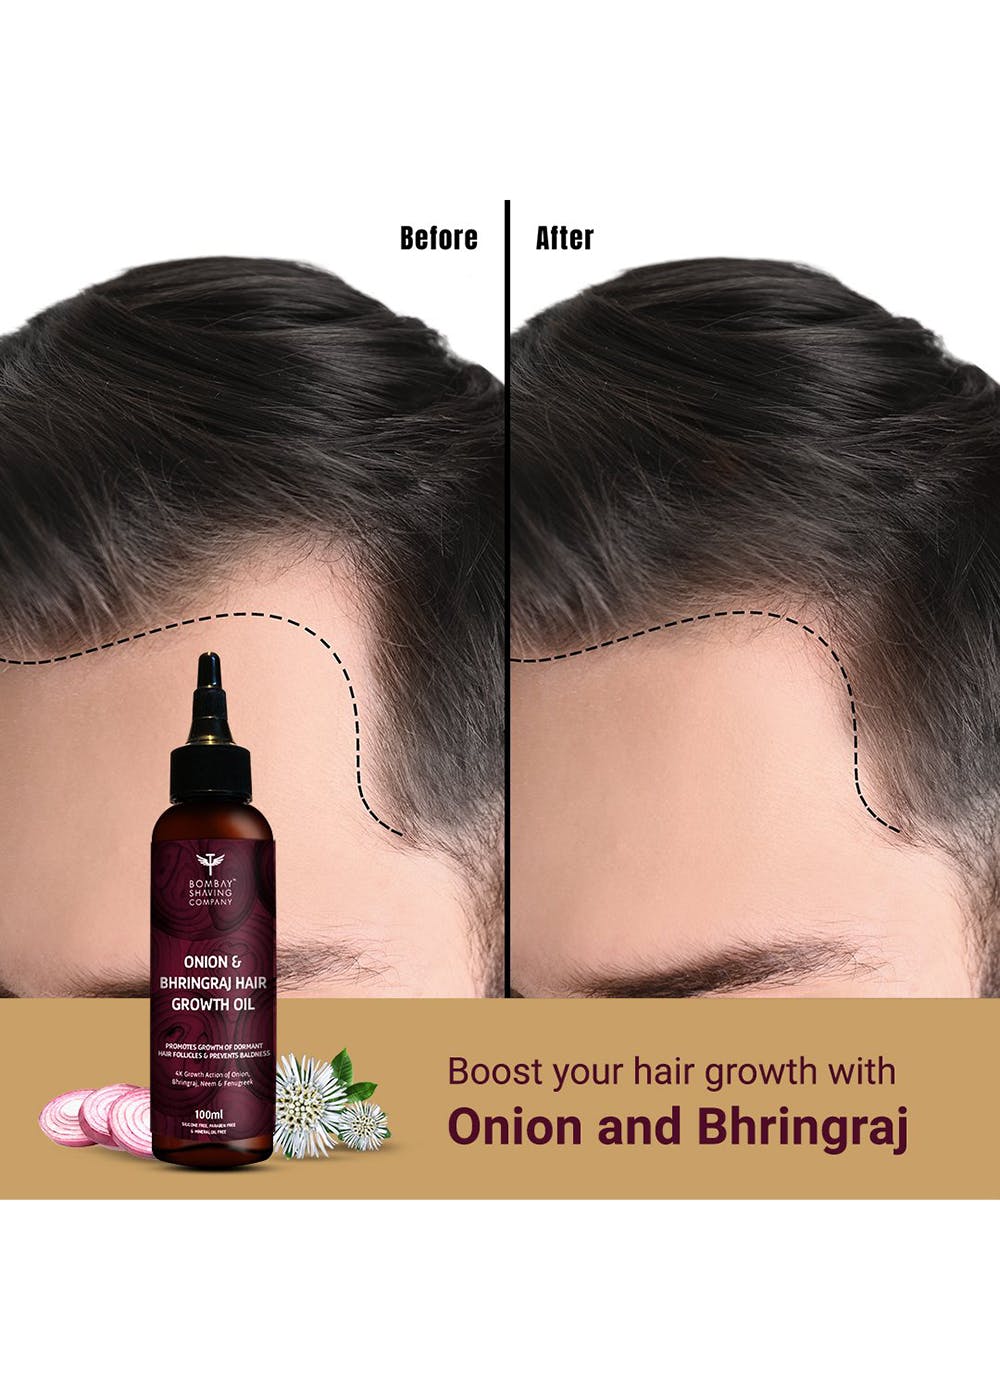 Hair loss treatment: Bhringraj oil exceeds minoxidil in study |  Express.co.uk